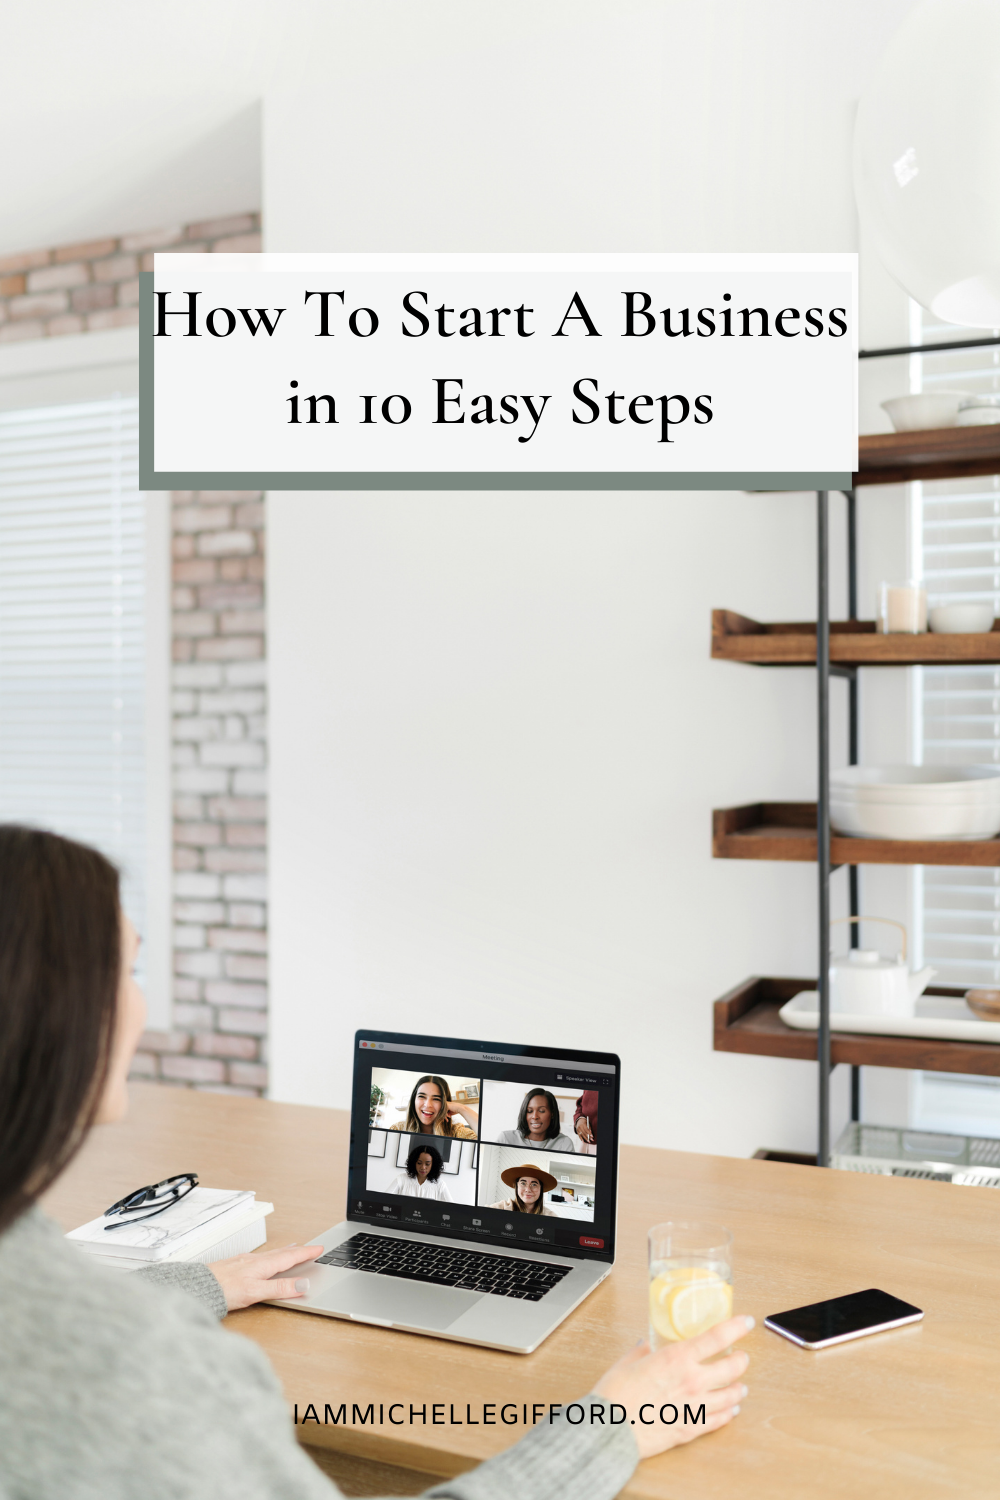 How to Start a Business in 10 Easy Steps www.iammichellegifford.com